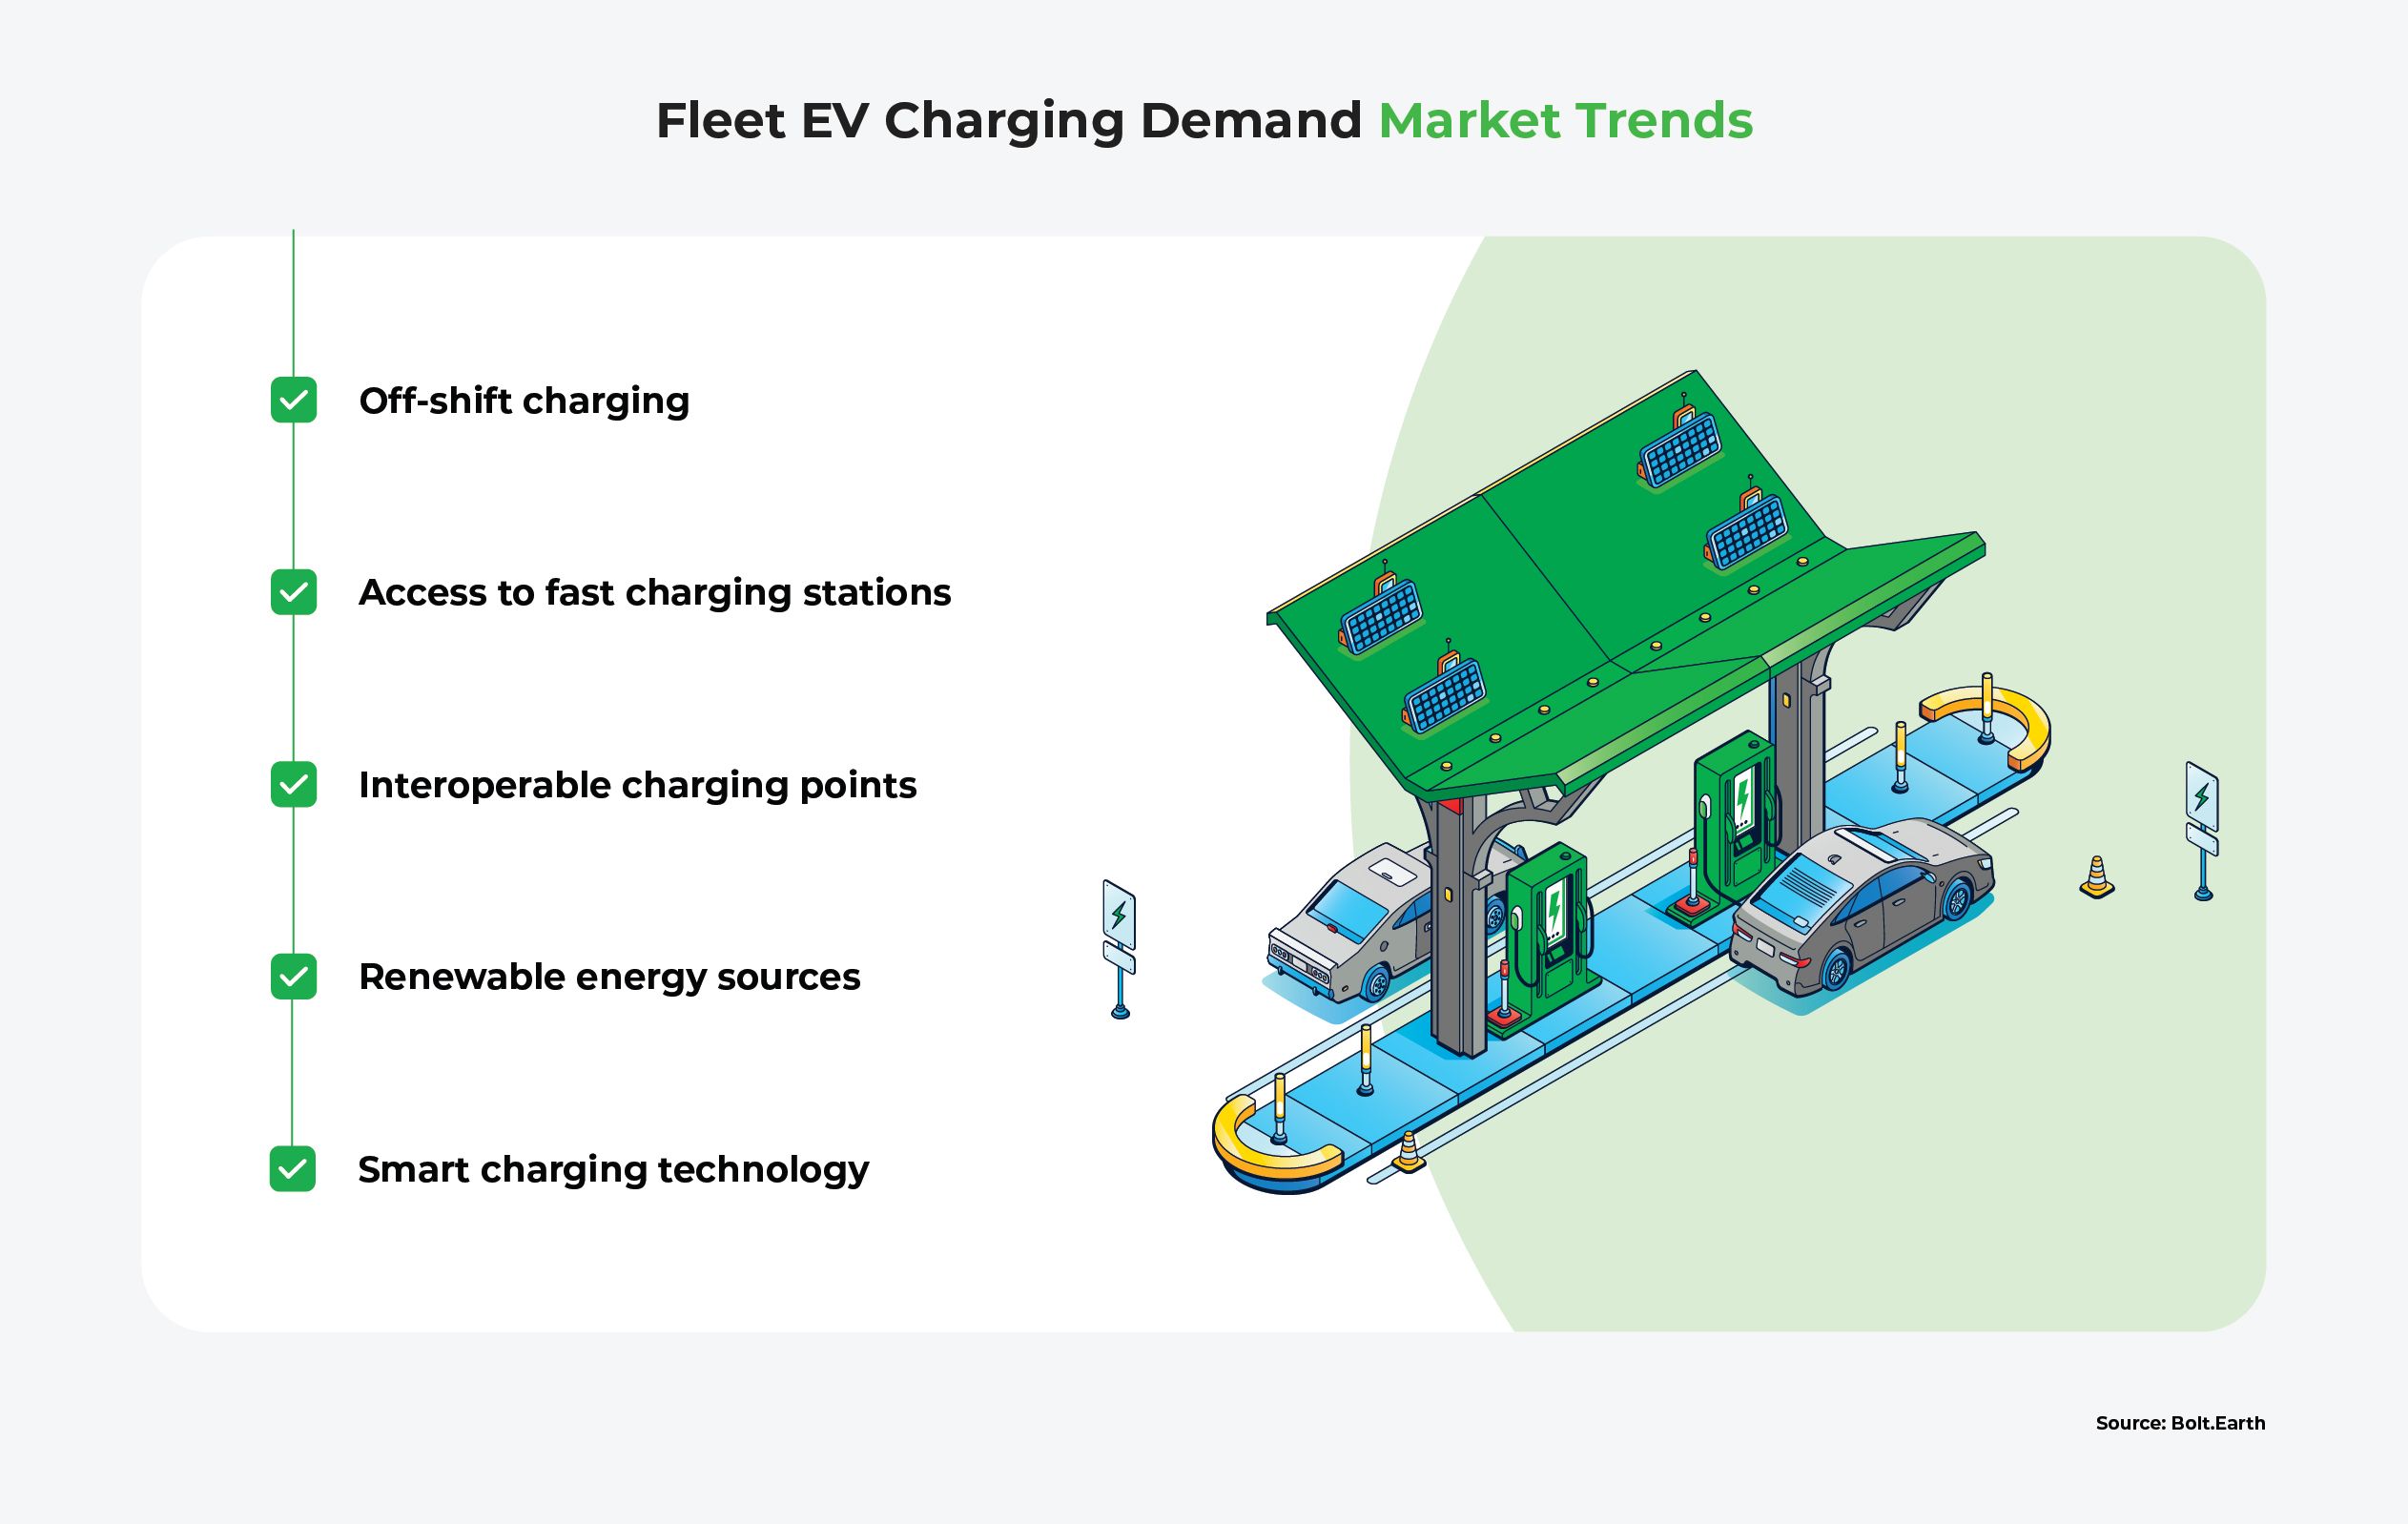 List of current market trends in charging demand management